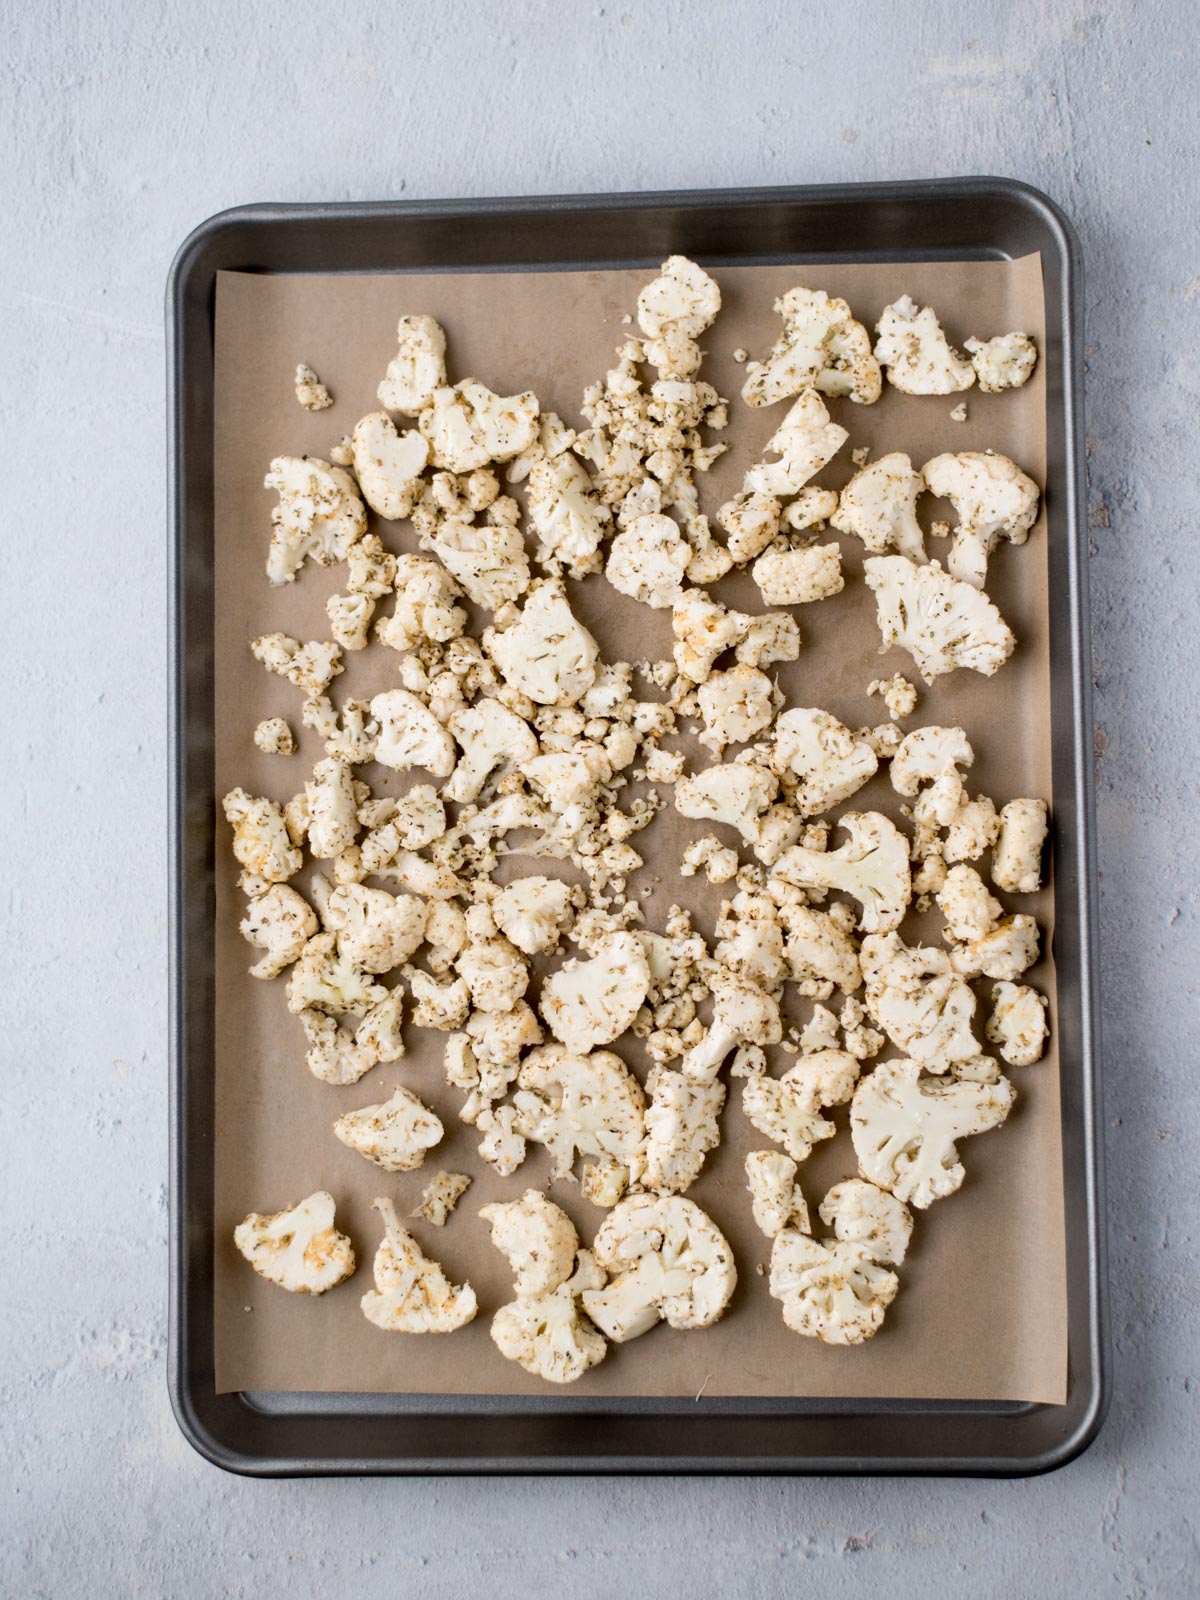 uncooked, seasoned cauliflower on a parchment lined baking sheet